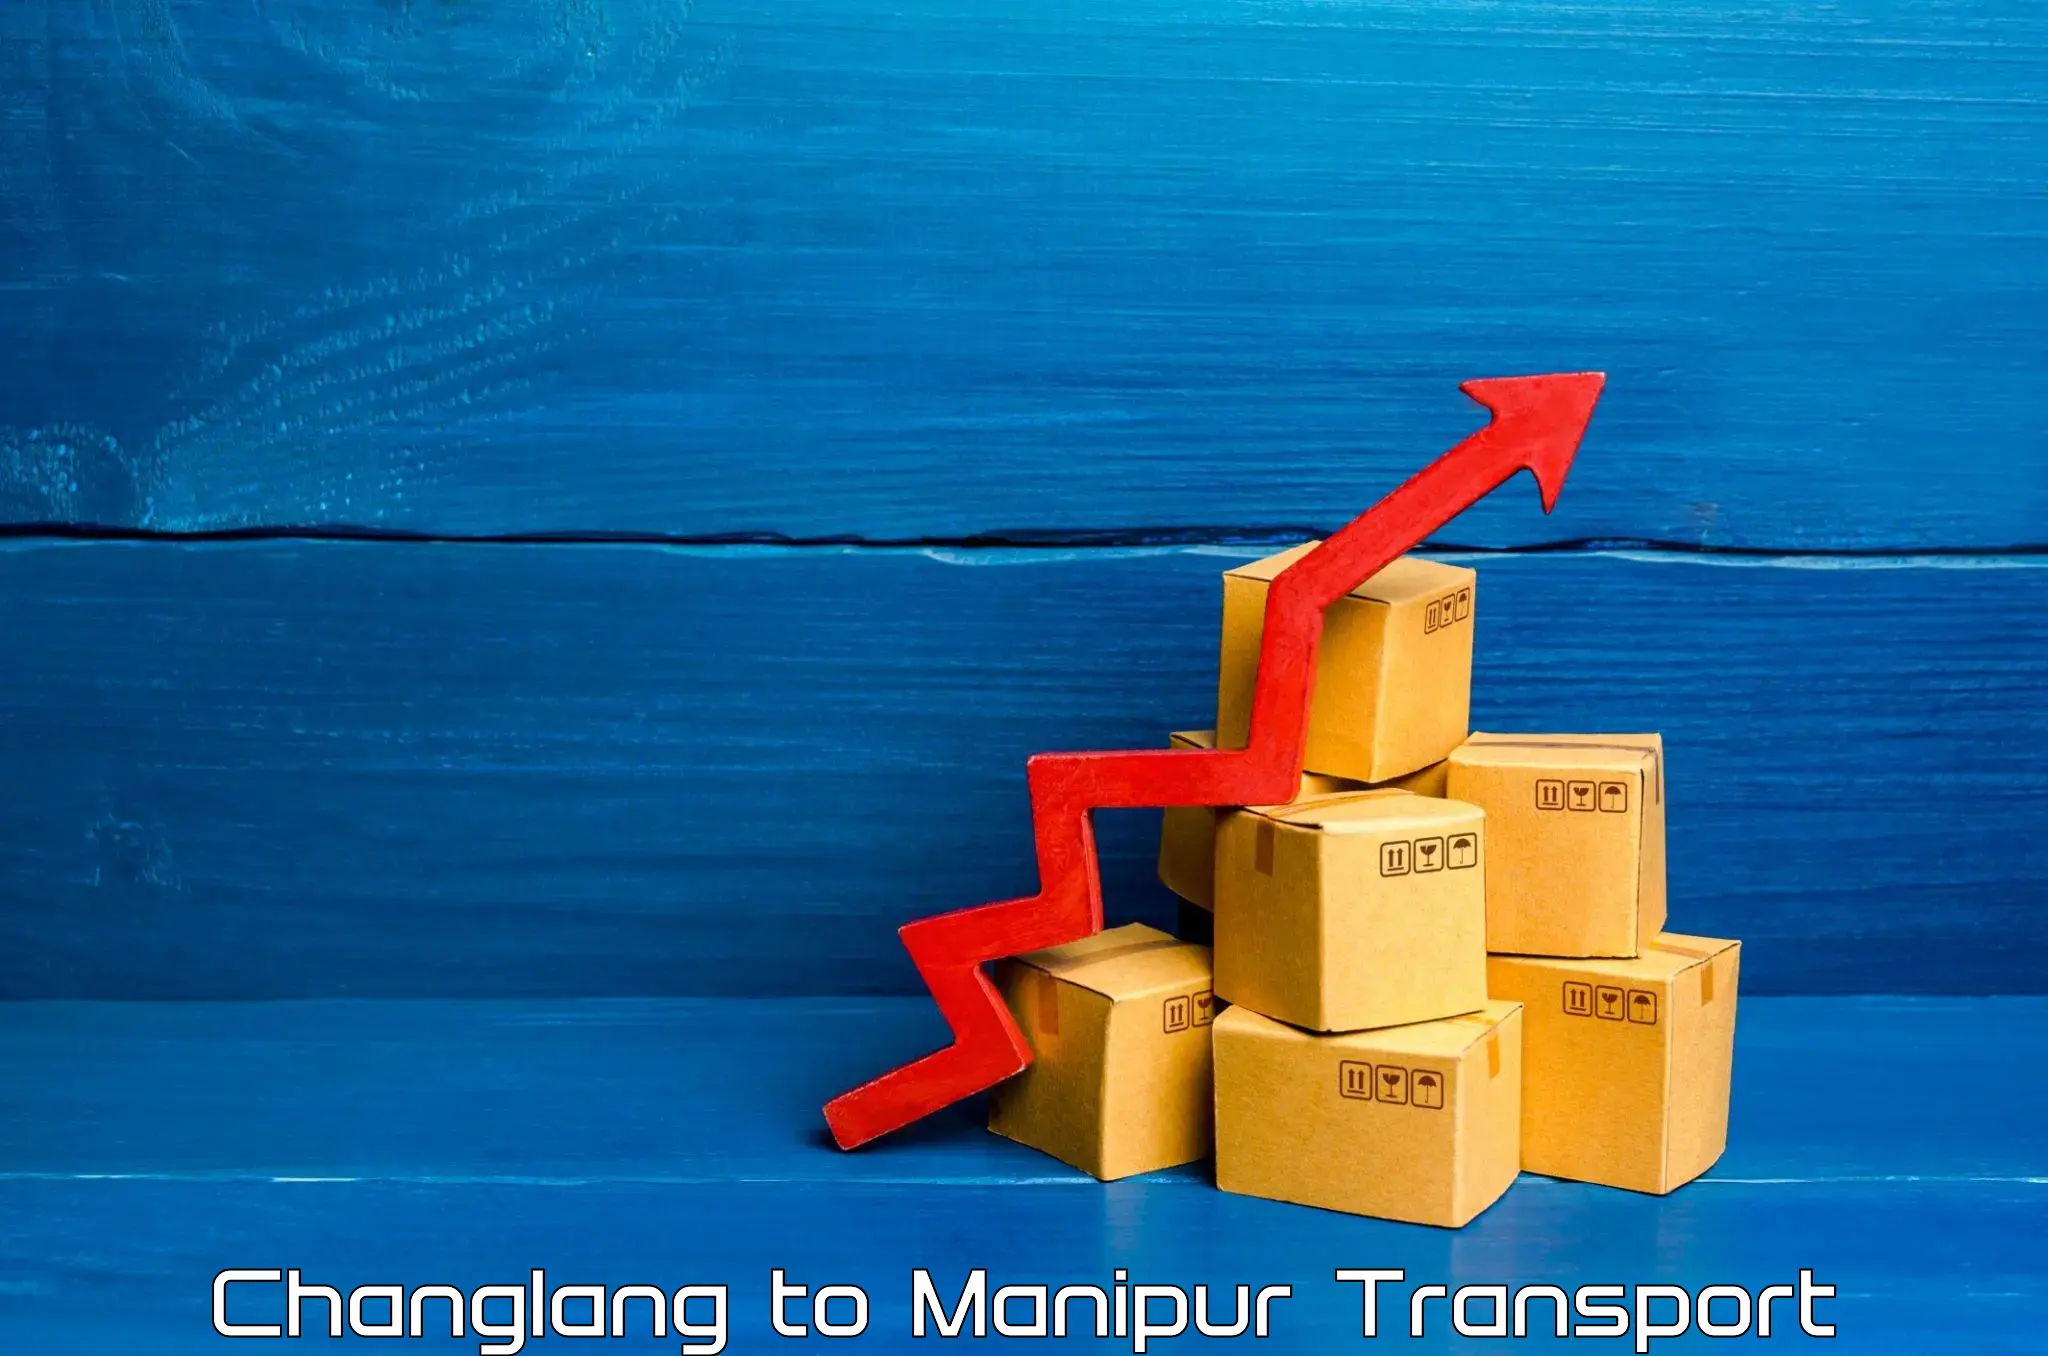 Pick up transport service Changlang to Manipur